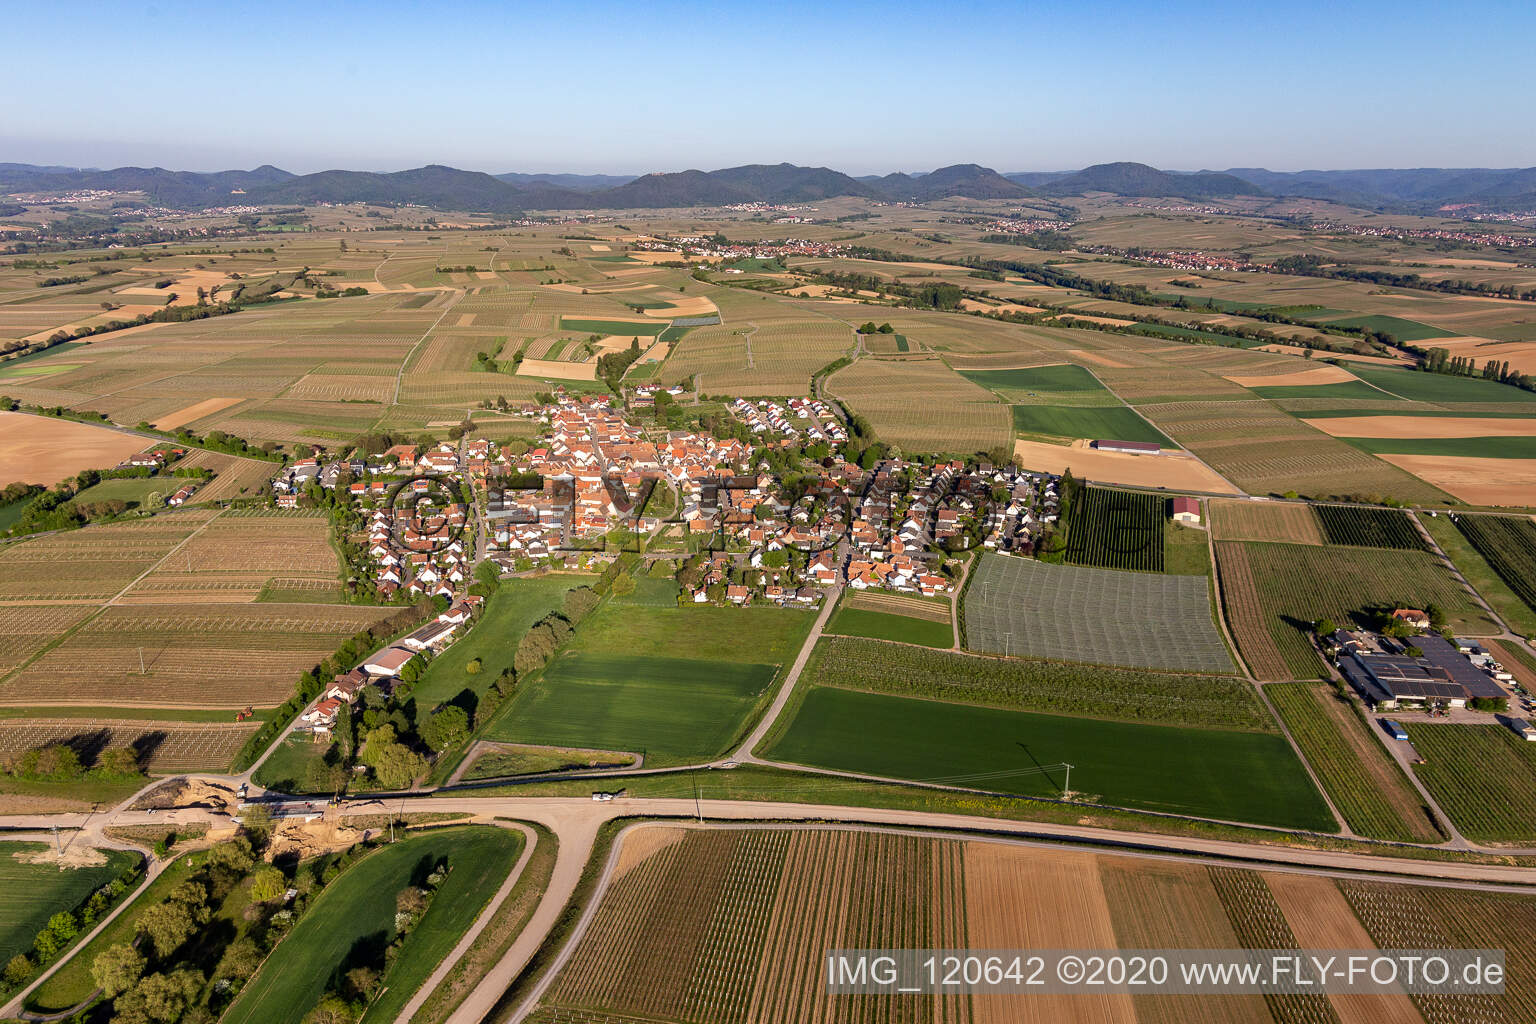 Village - view on the edge of agricultural fields and farmland in Impflingen in the state Rhineland-Palatinate, Germany